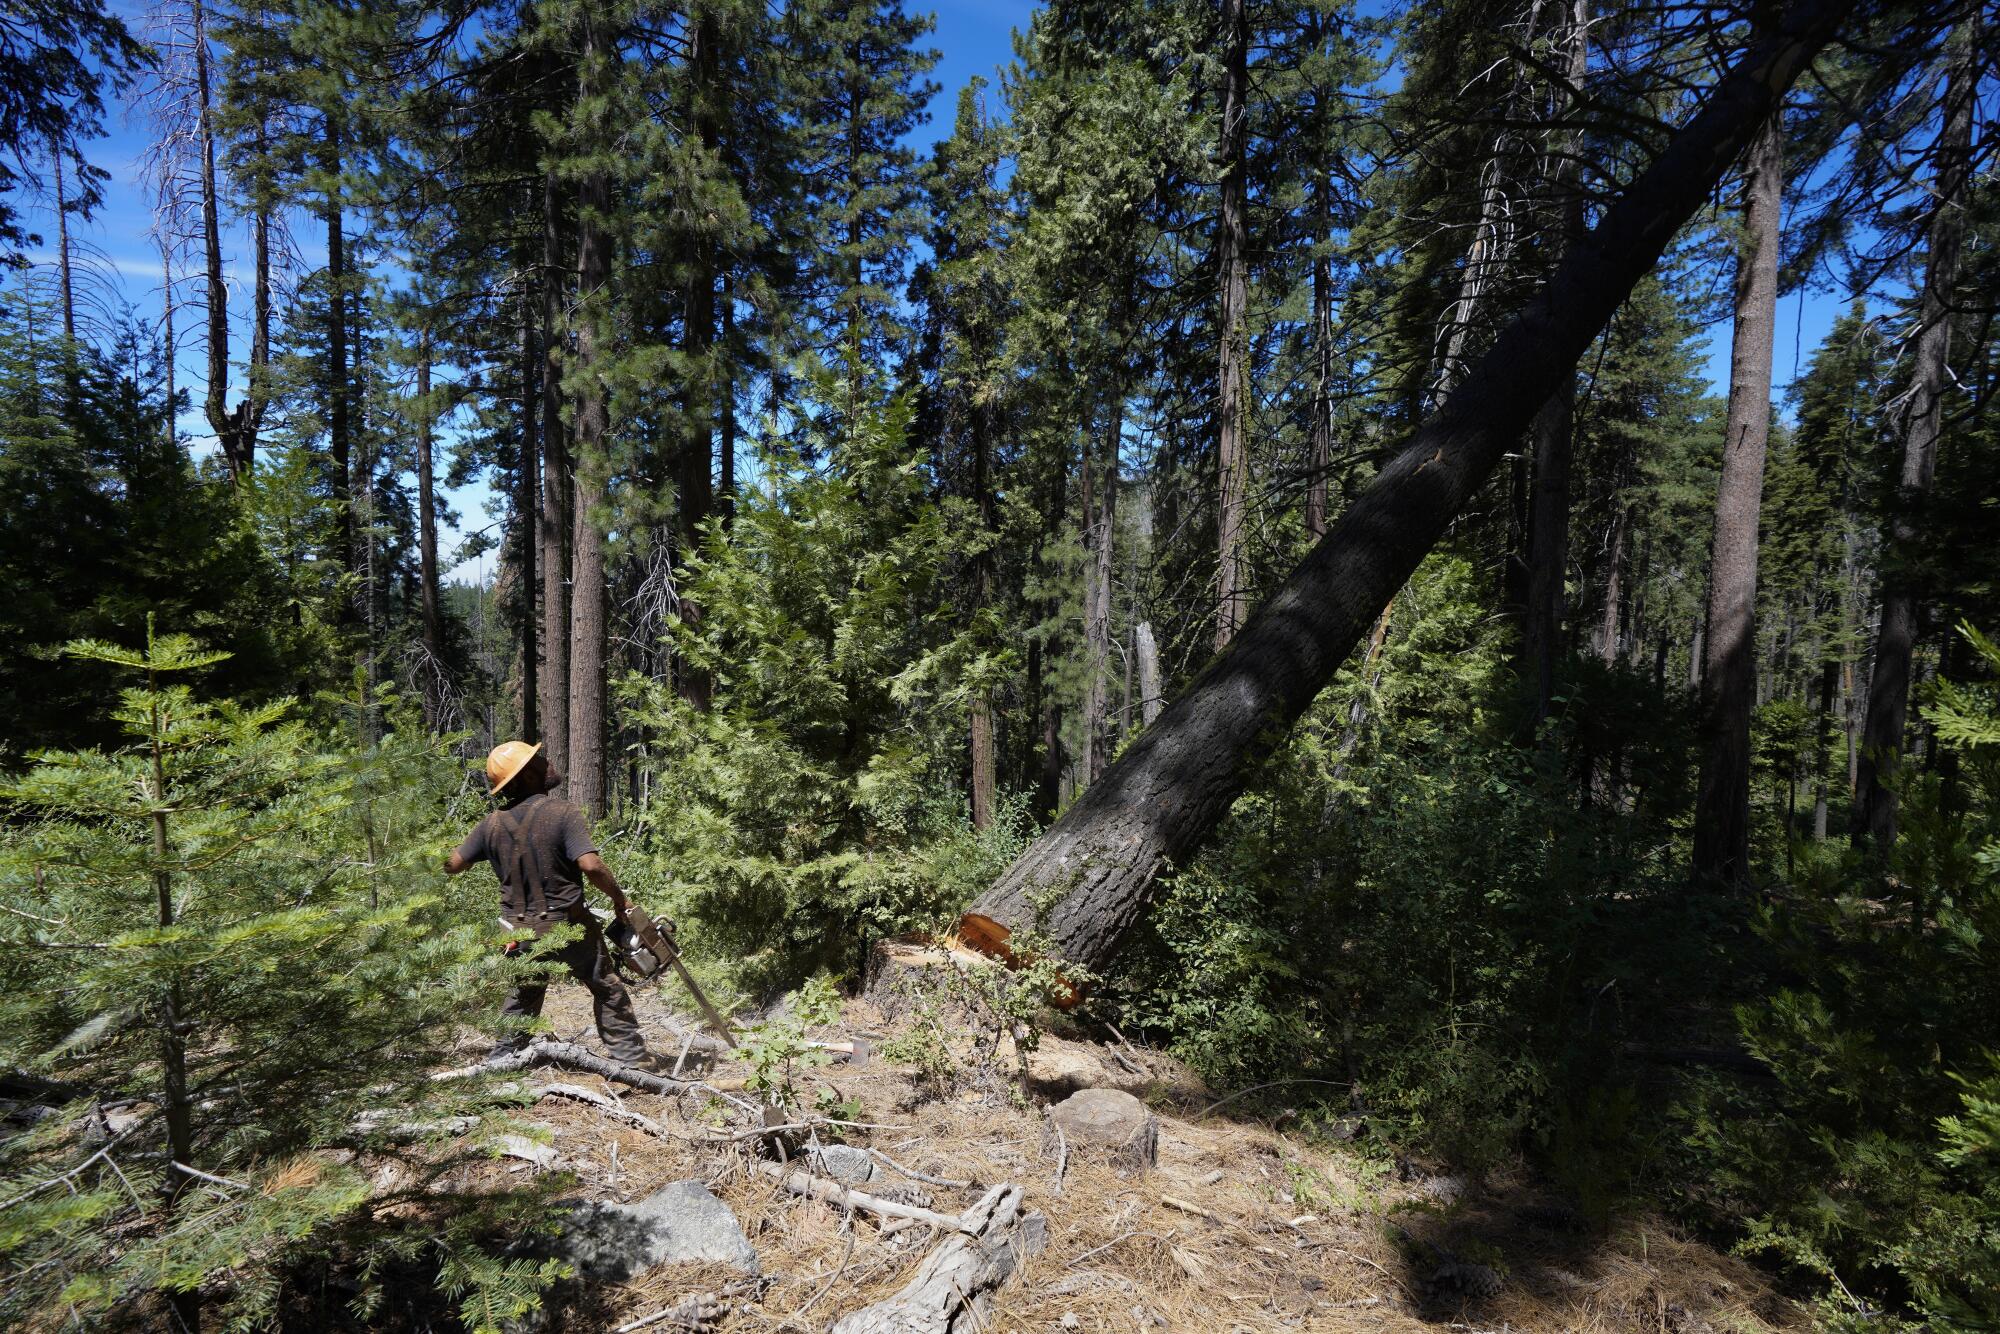 Nick Scuba, a timber faller, works in the Sierra National Forest to remove trees that have been marked as dead or a hazard.